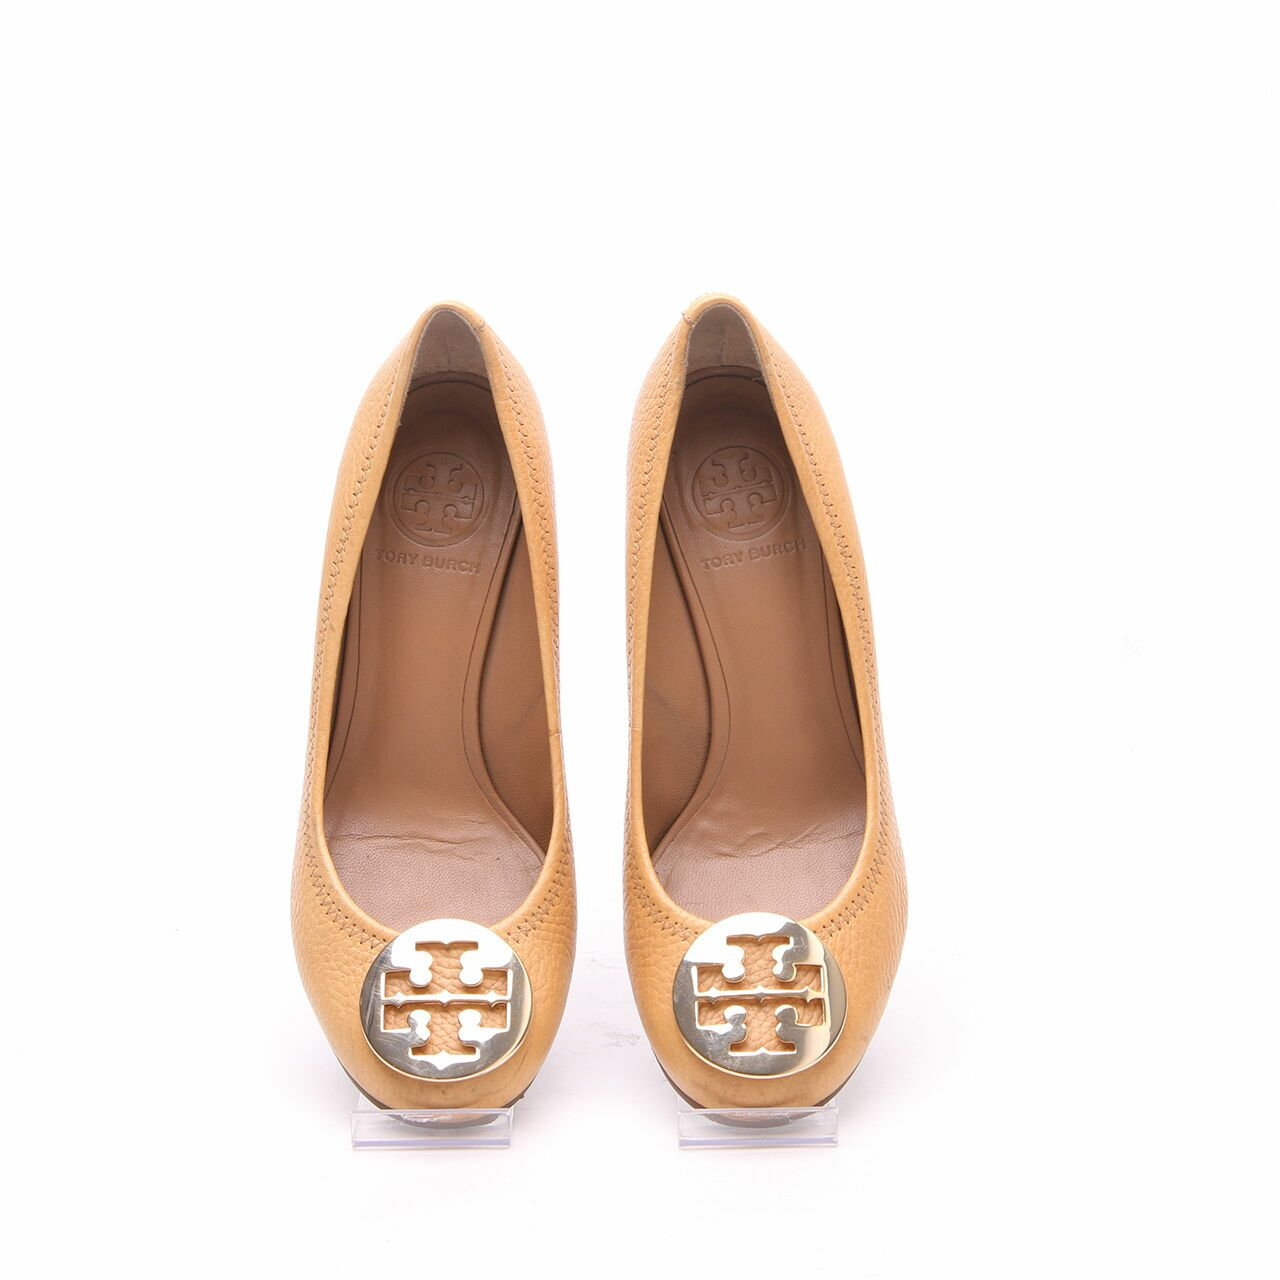 Tory Burch Sally Royal Tan/Gold Tumbled Leather Wedges